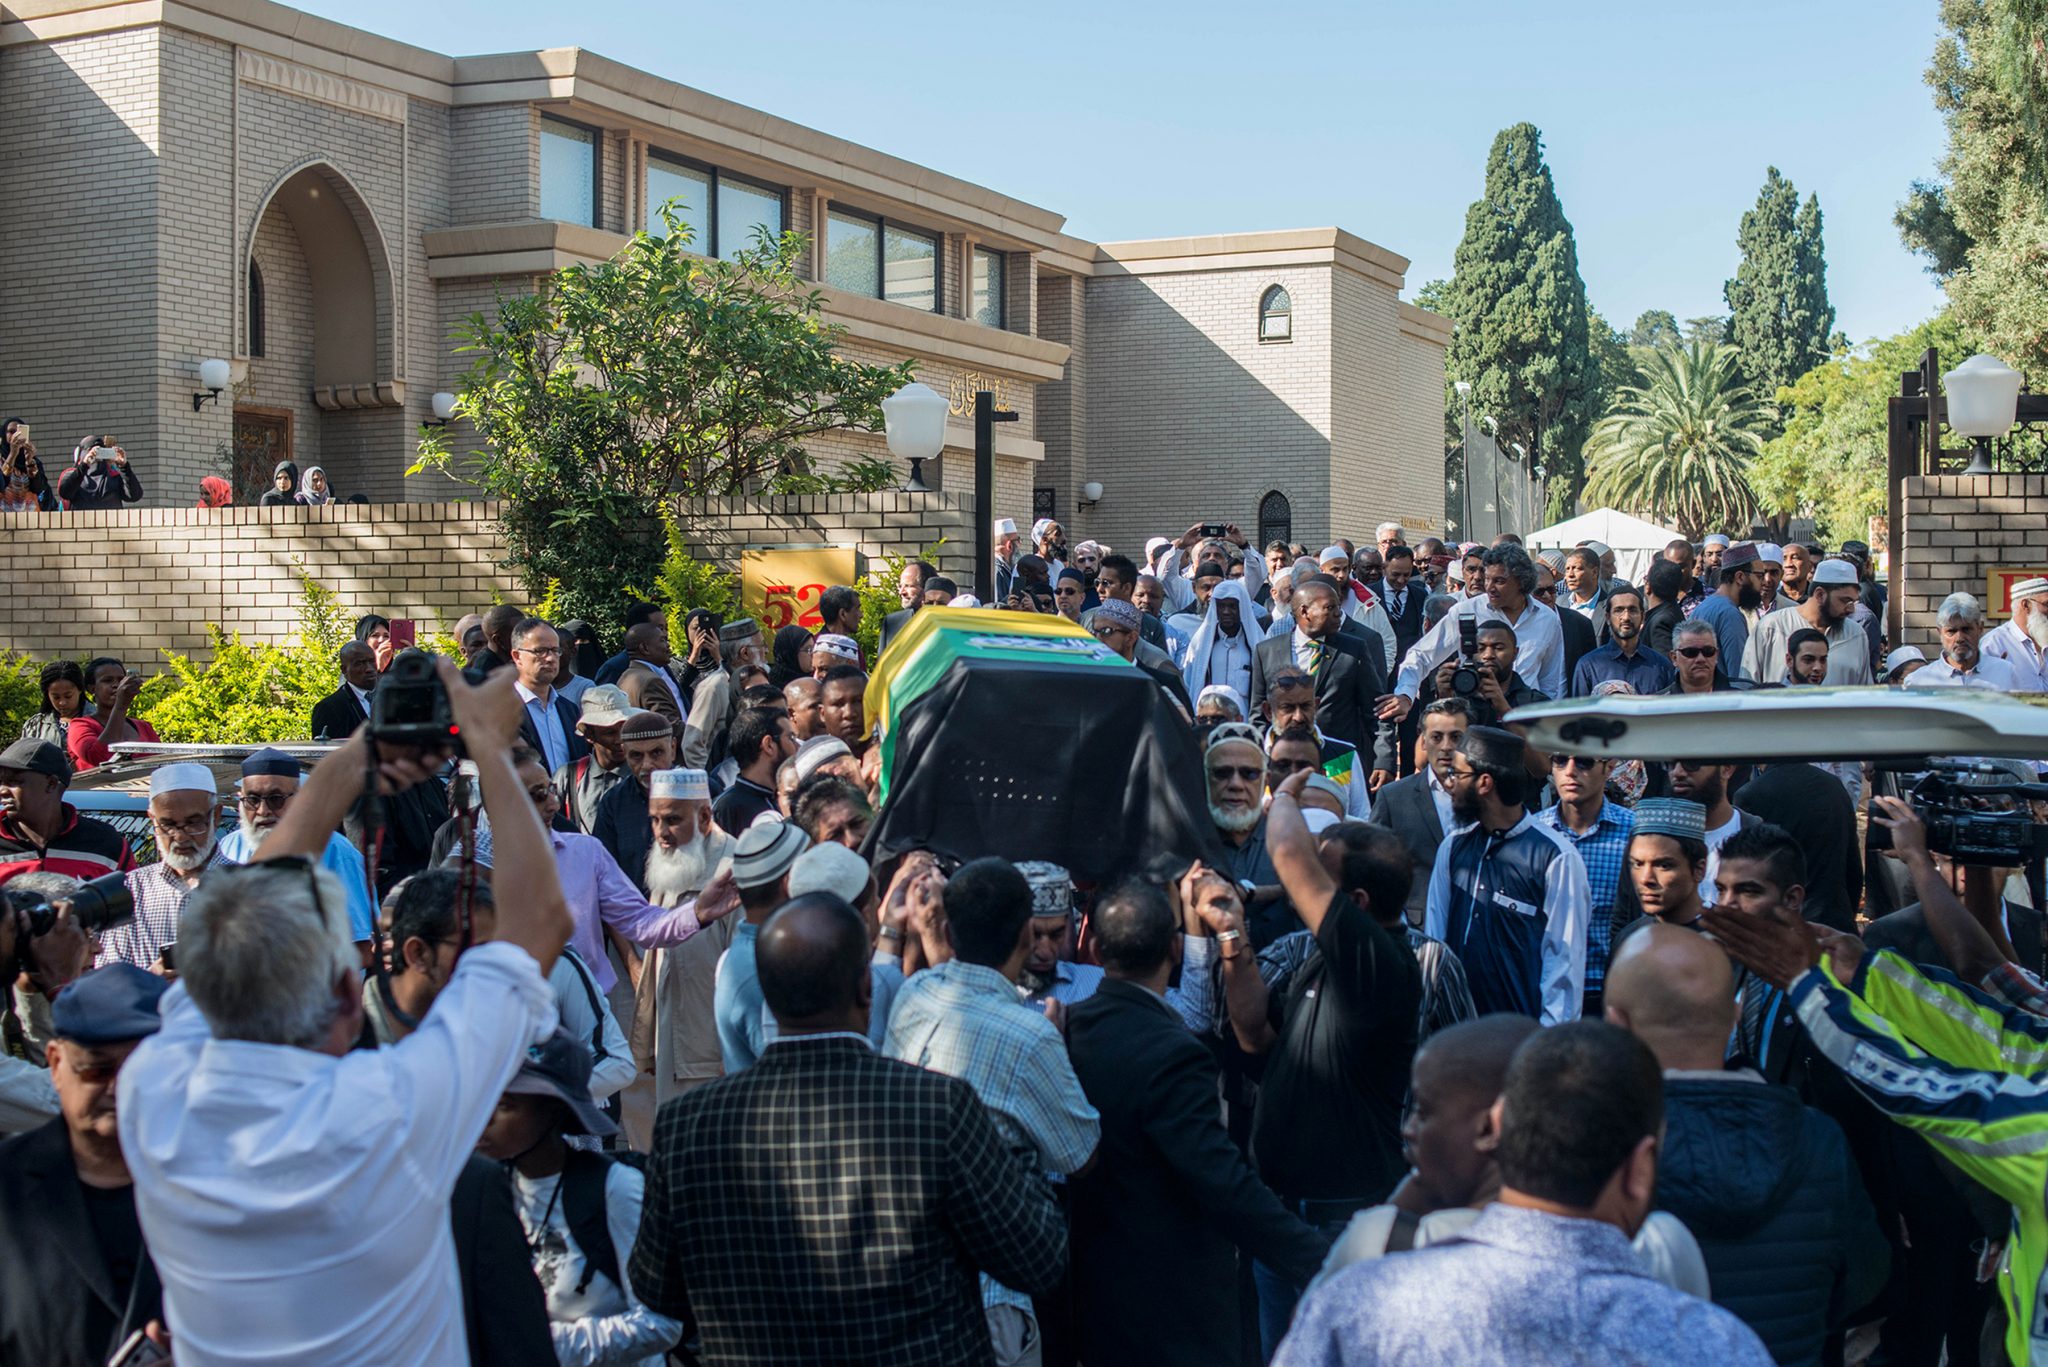 Mourners carry the coffin during the wake for South African anti-apartheid activist Ahmed Kathrada in Houghton on March 29, 2017. Kathrada, one of Nelson Mandela's closest colleagues in the struggle against white minority rule, died on March 28, aged 87.   / AFP PHOTO / MUJAHID SAFODIEN